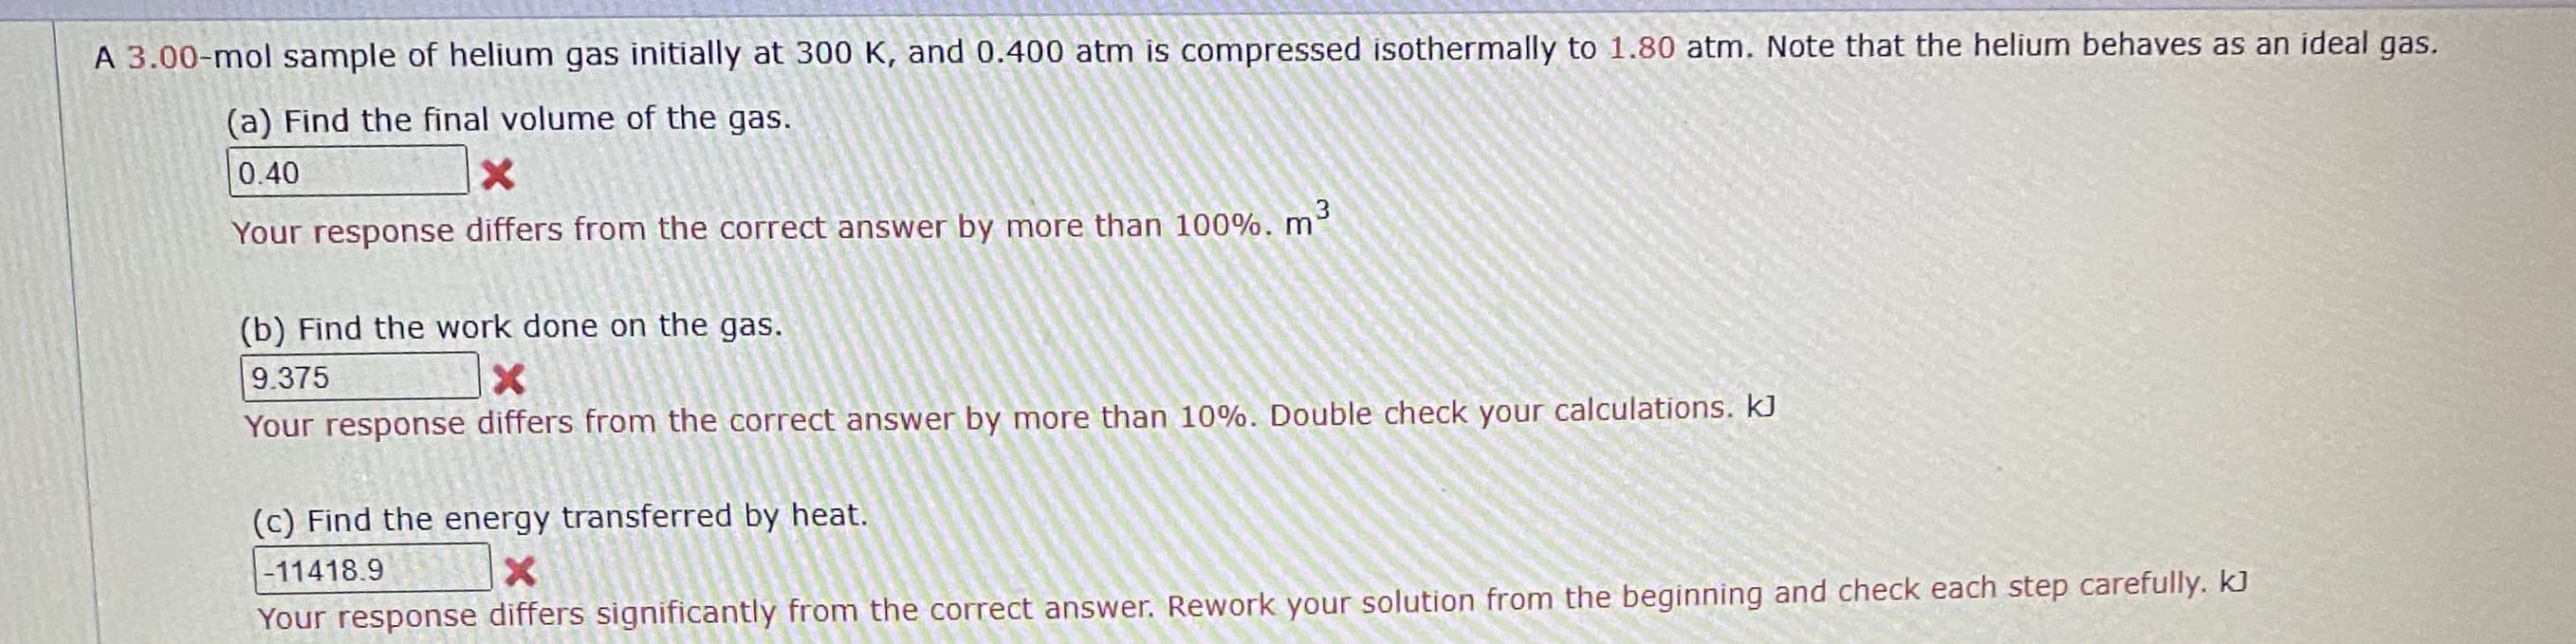 A 3.00-mol sample of helium gas initially at 300 K, and 0.400 atm is compressed isothermally to 1.80 atm. Note that the helium behaves as an ideal gas.
(a) Find the final volume of the gas.
0.40
Your response differs from the correct answer by more than 100%. m
(b) Find the work done on the gas.
9.375
Your response differs from the correct answer by more than 10%. Double check your calculations. kJ
(c) Find the energy transferred by heat.
-11418.9
nd check each sten carefully, kJ
